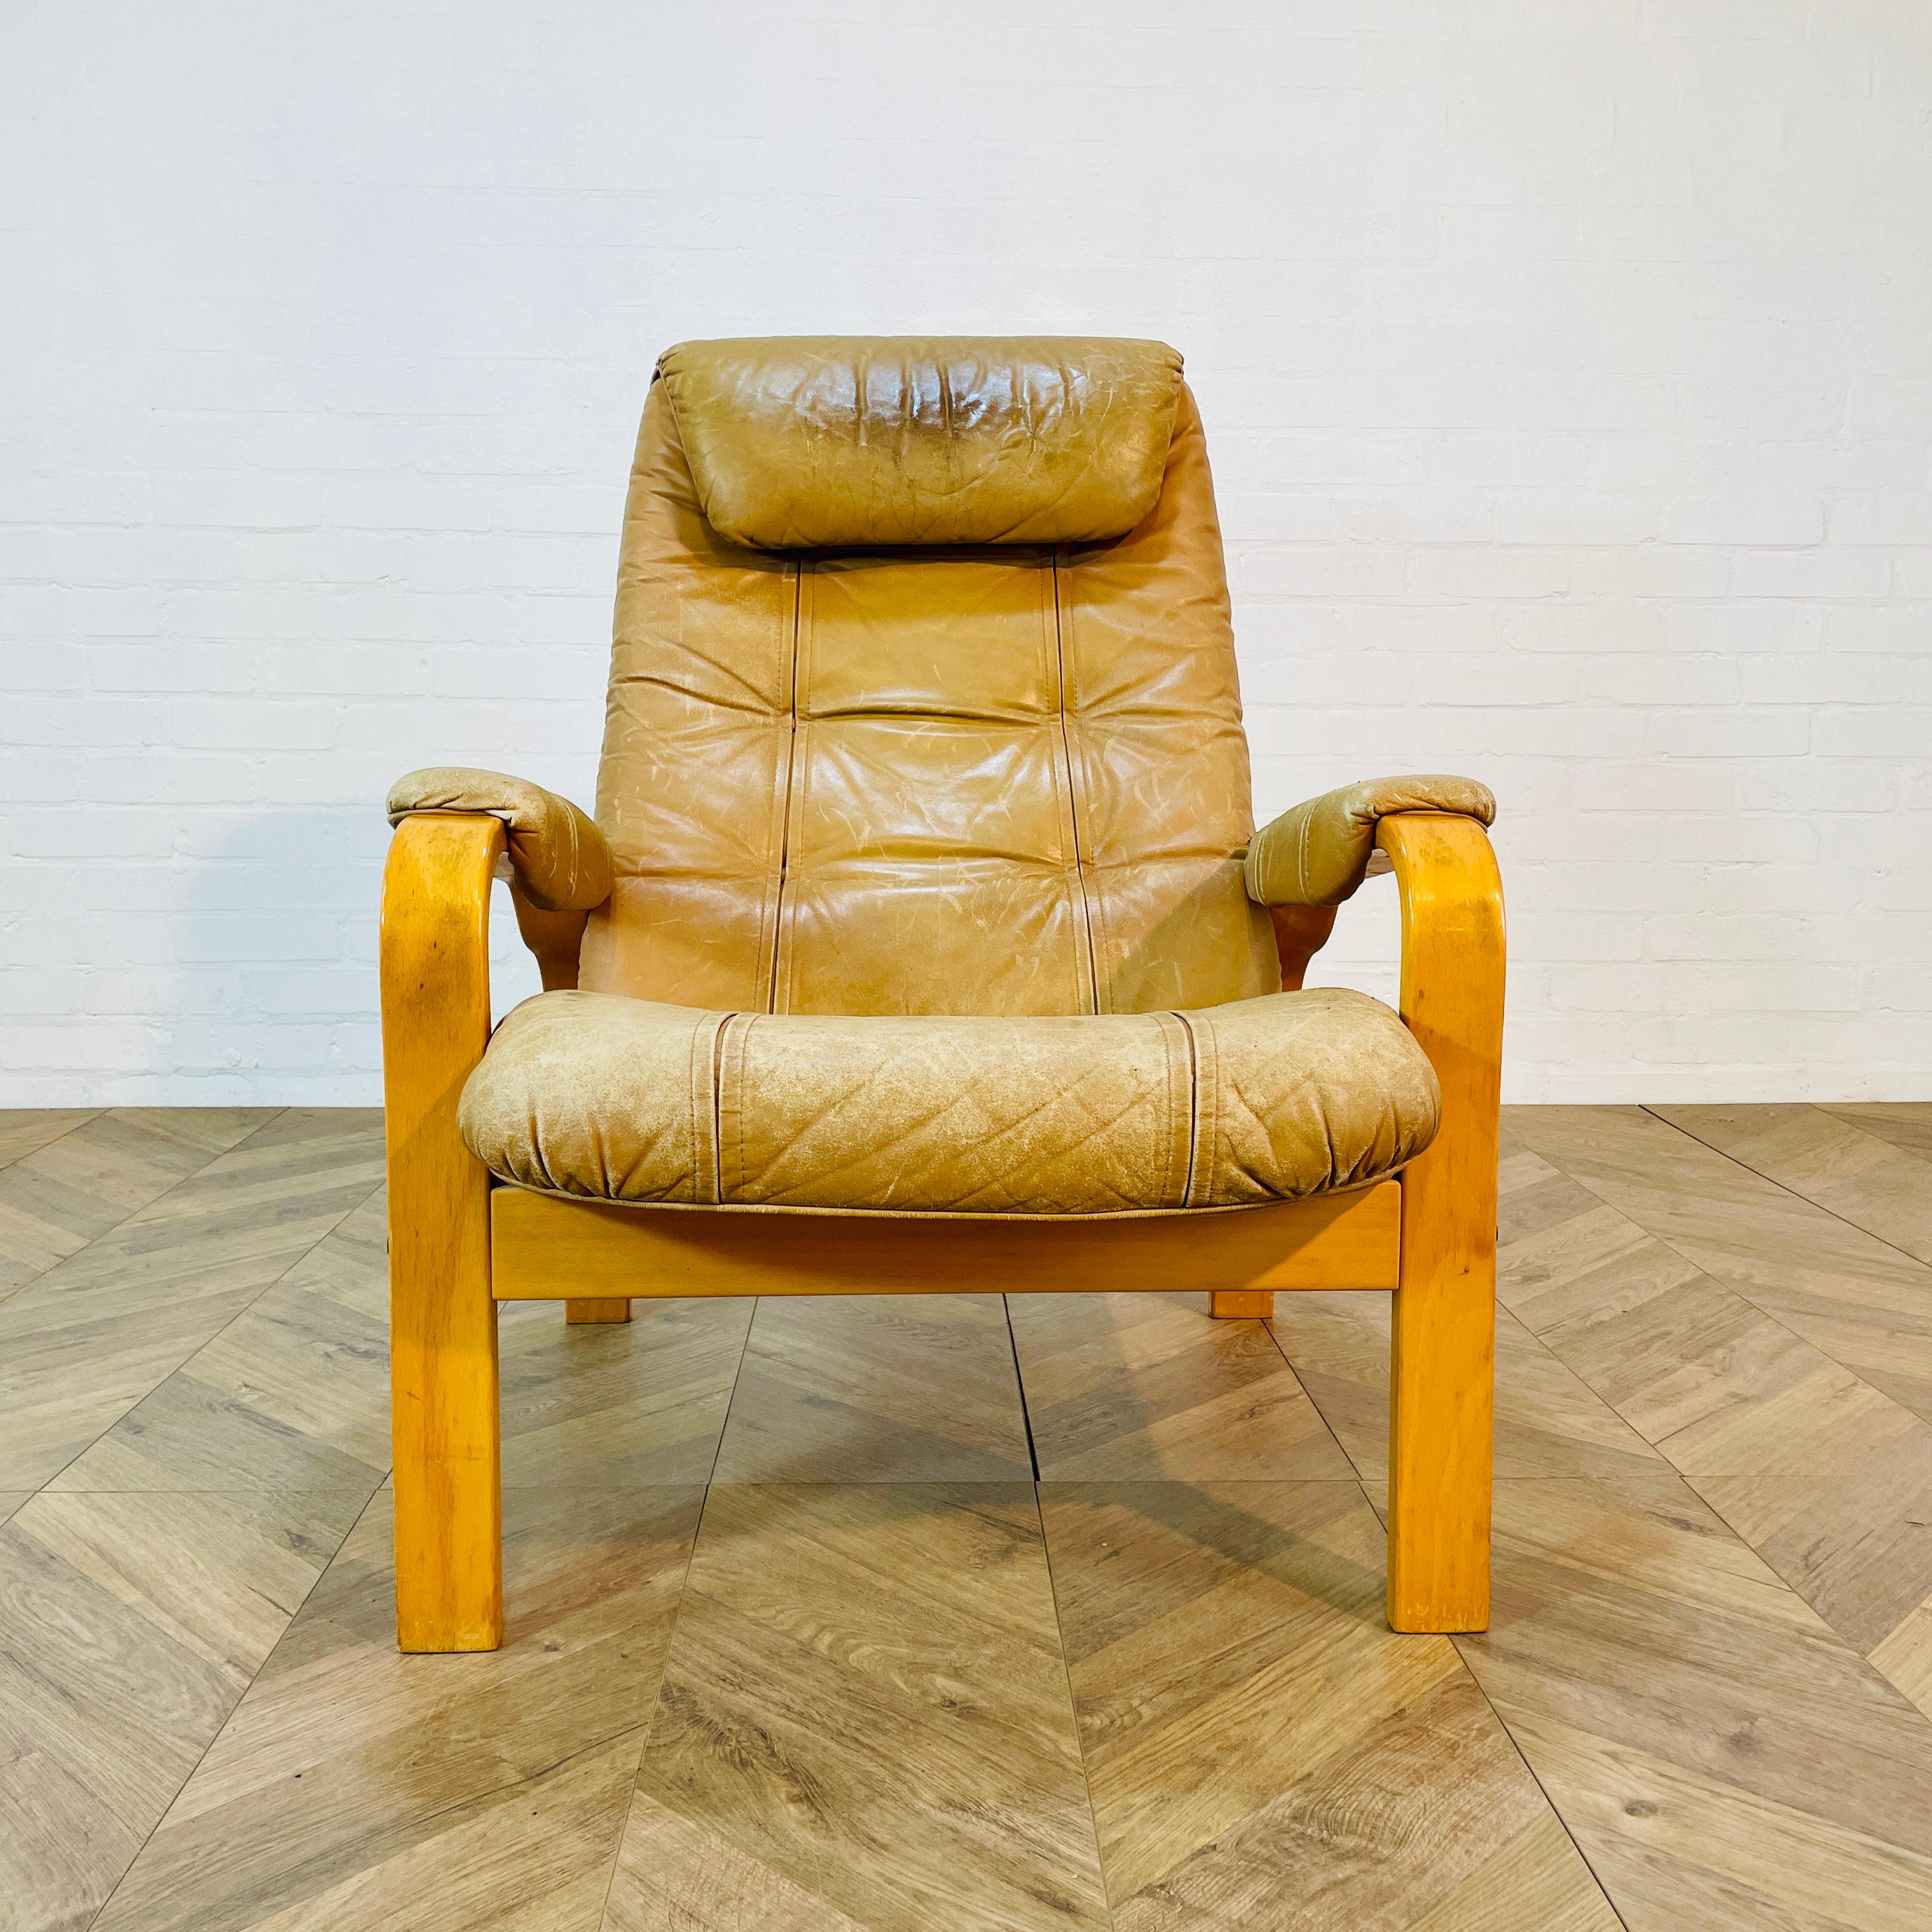 A Retro Leather Lounge Chair by Norwegian firm; Skoghaug Industries, circa late 1970s.

The chair is made from a tan leather material and in good vintage condition, with visible wear and slight marks and scuffs to the arms and seat, in-keeping with